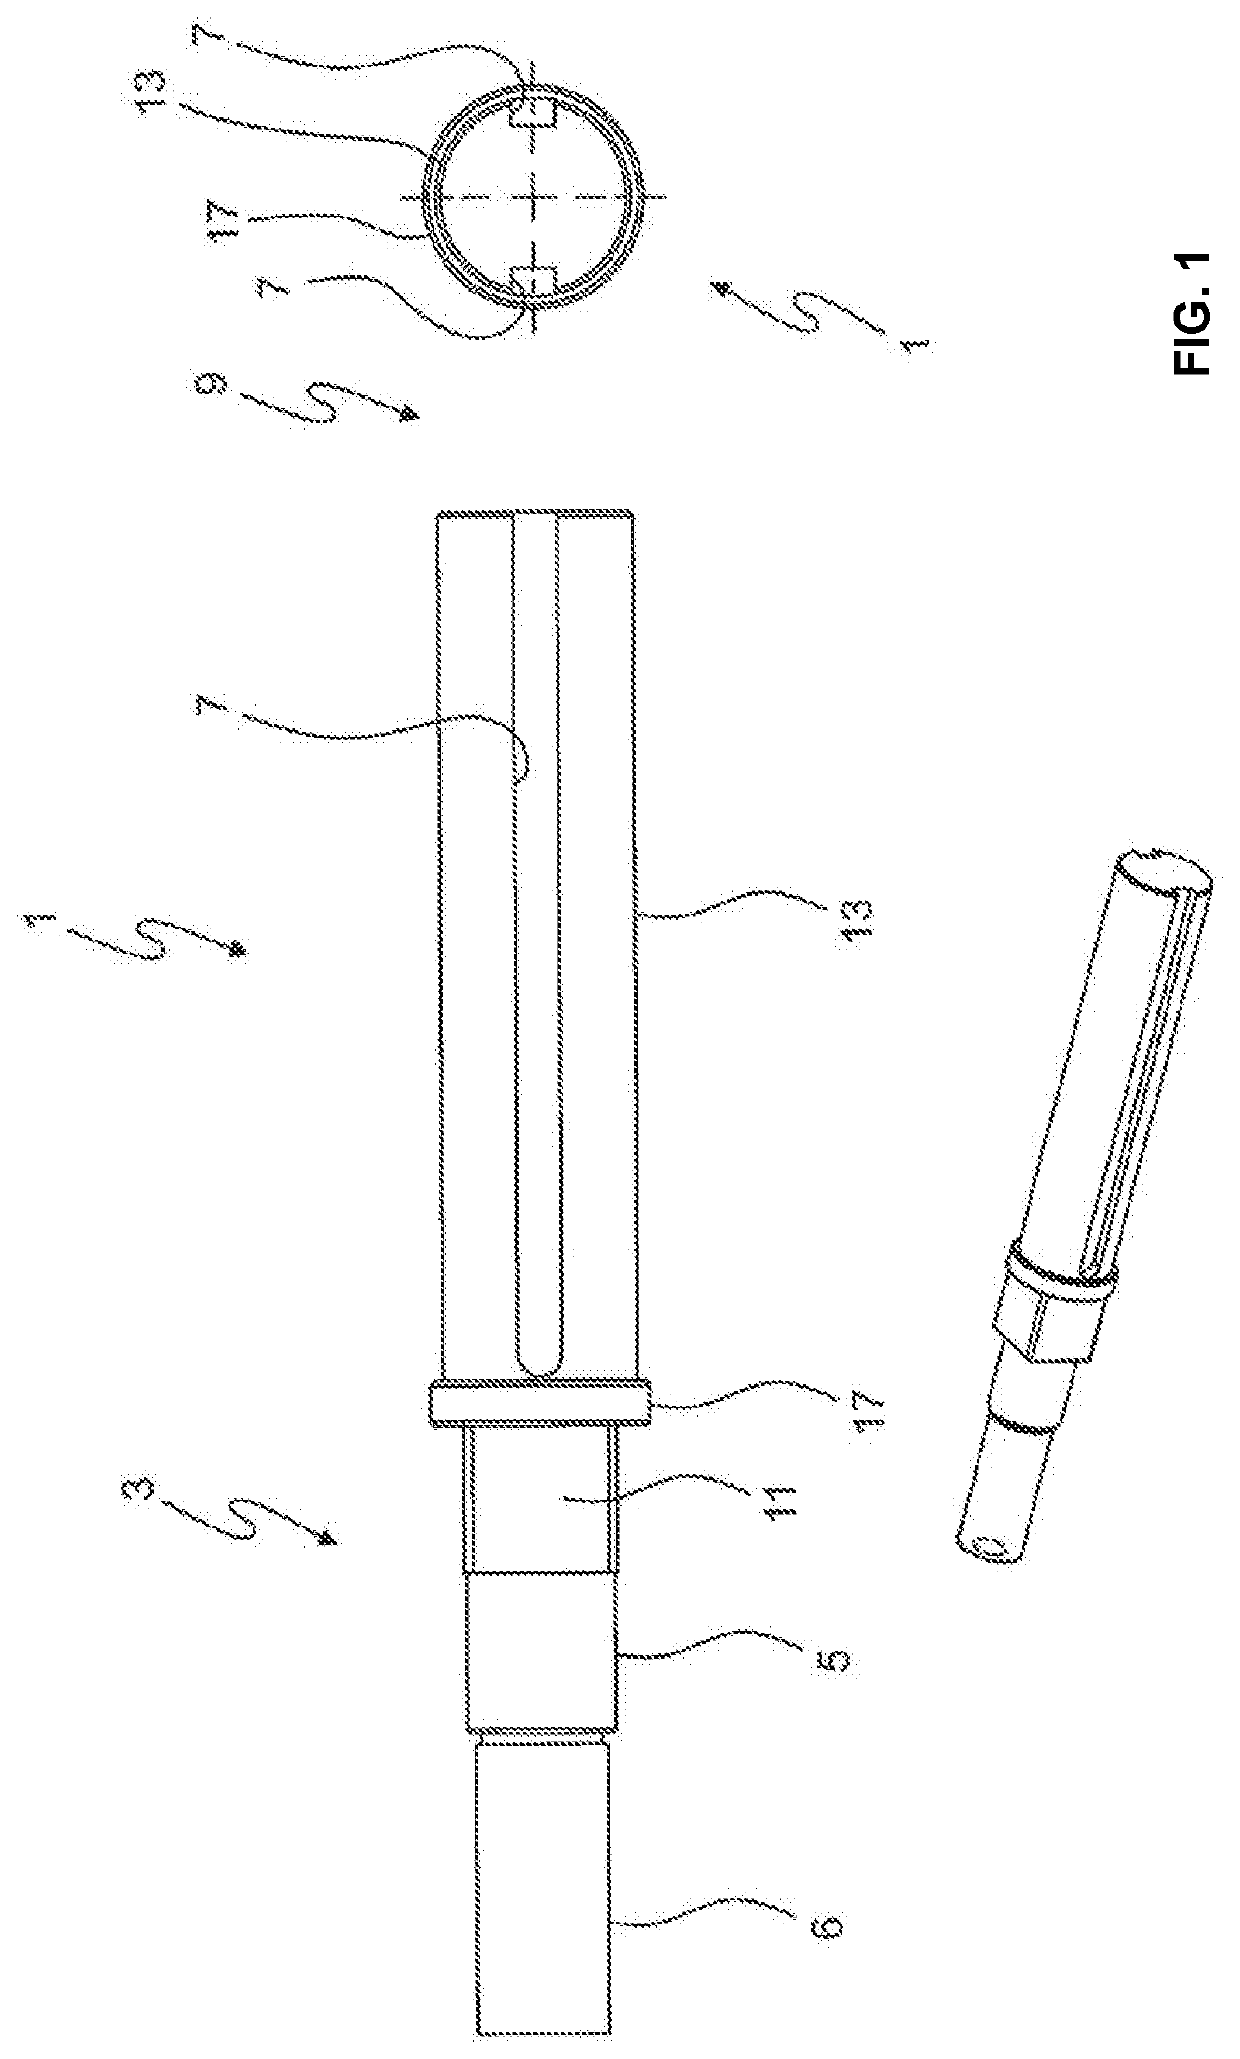 Tool and device for removal of material on surfaces